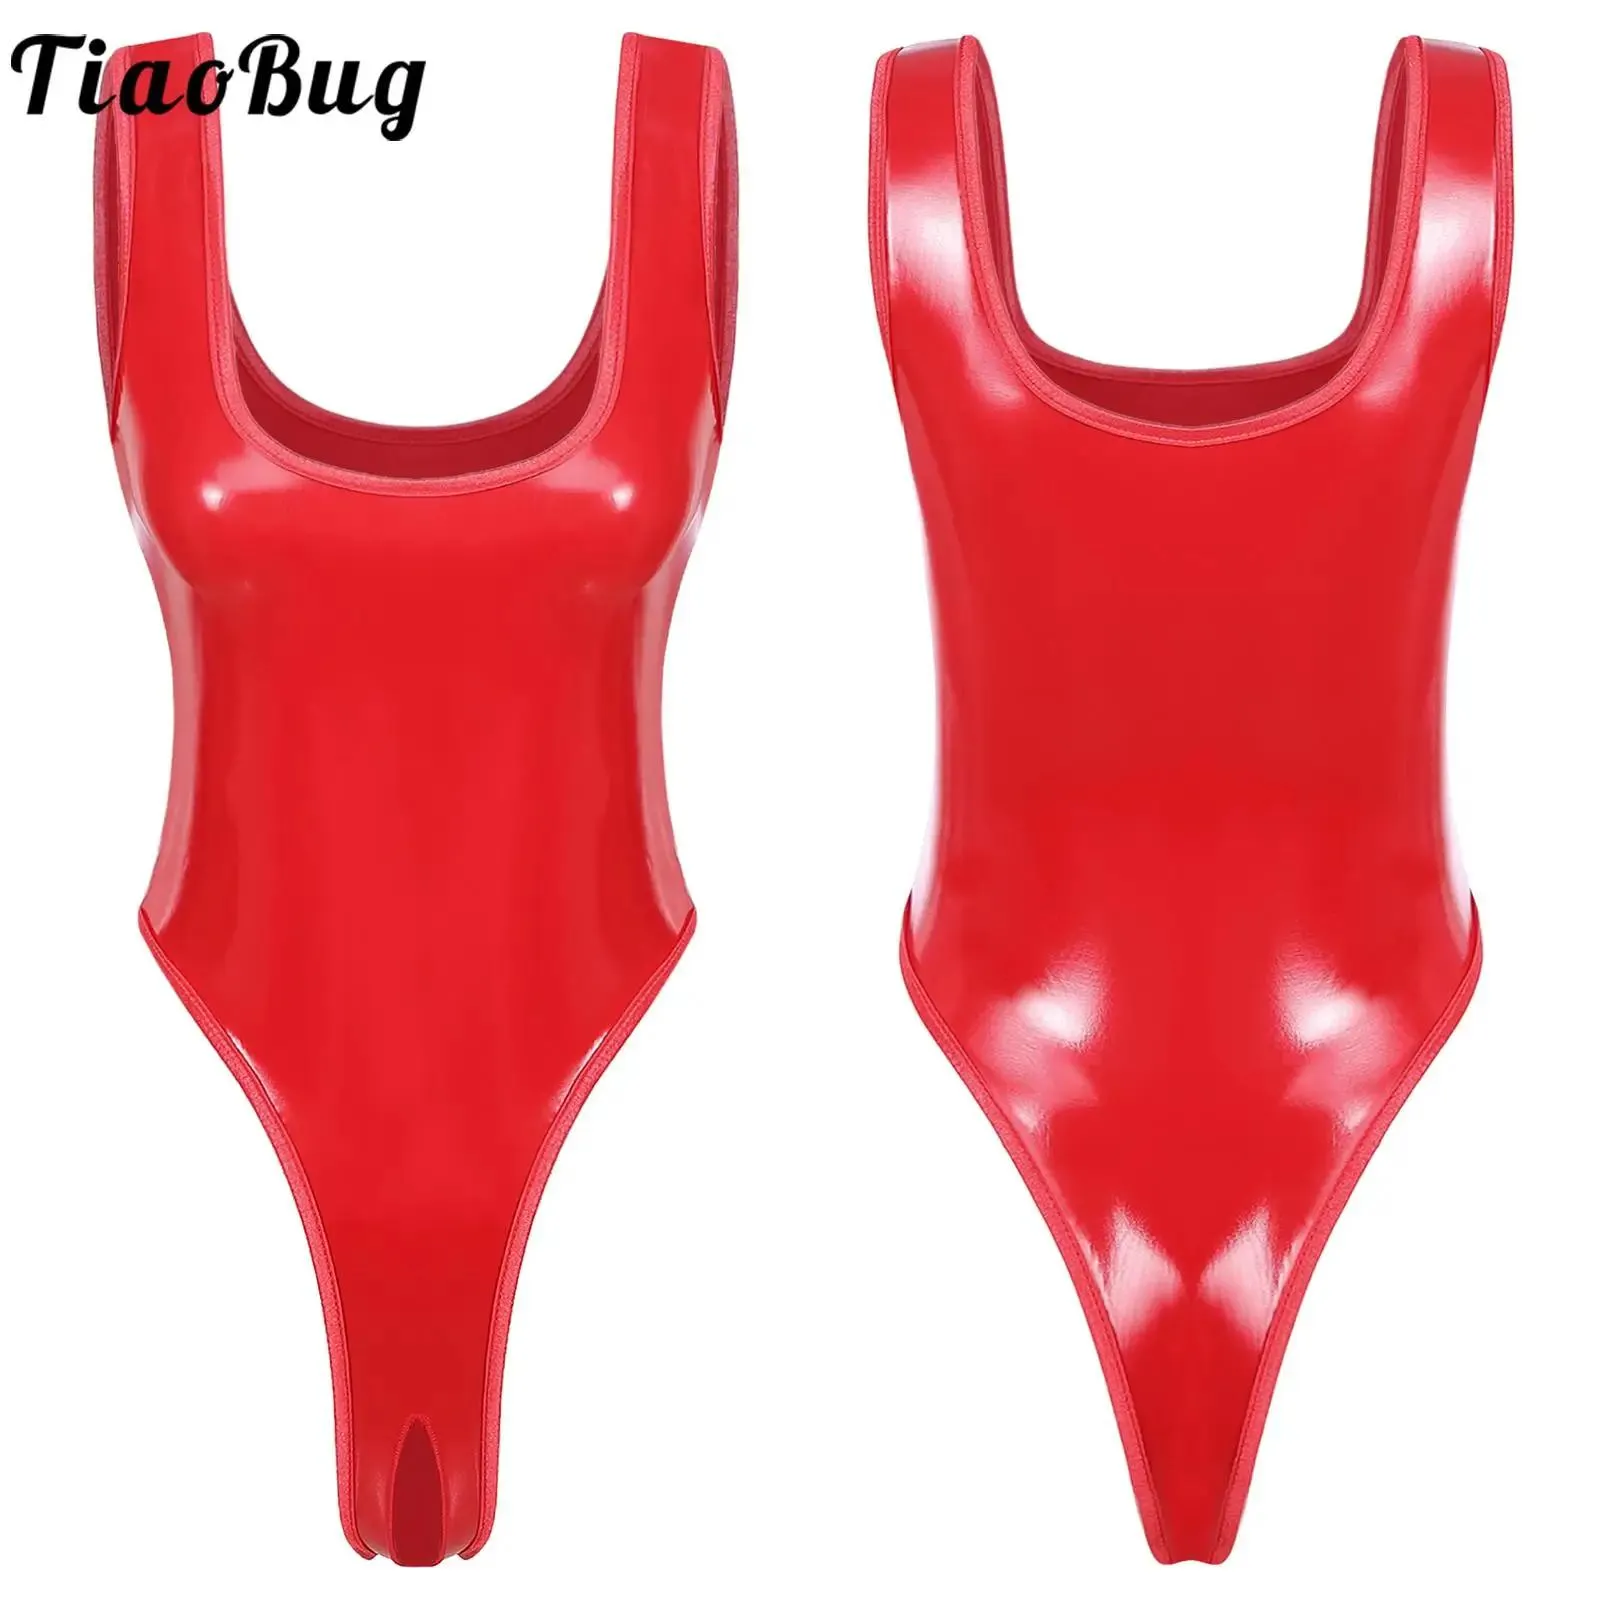 Calças Tiaobug Womens Wet Look Pure Color U Neck Crotchless Red Patent Leather Bodysuit High Cut Backless Catsuit Night Clubwear